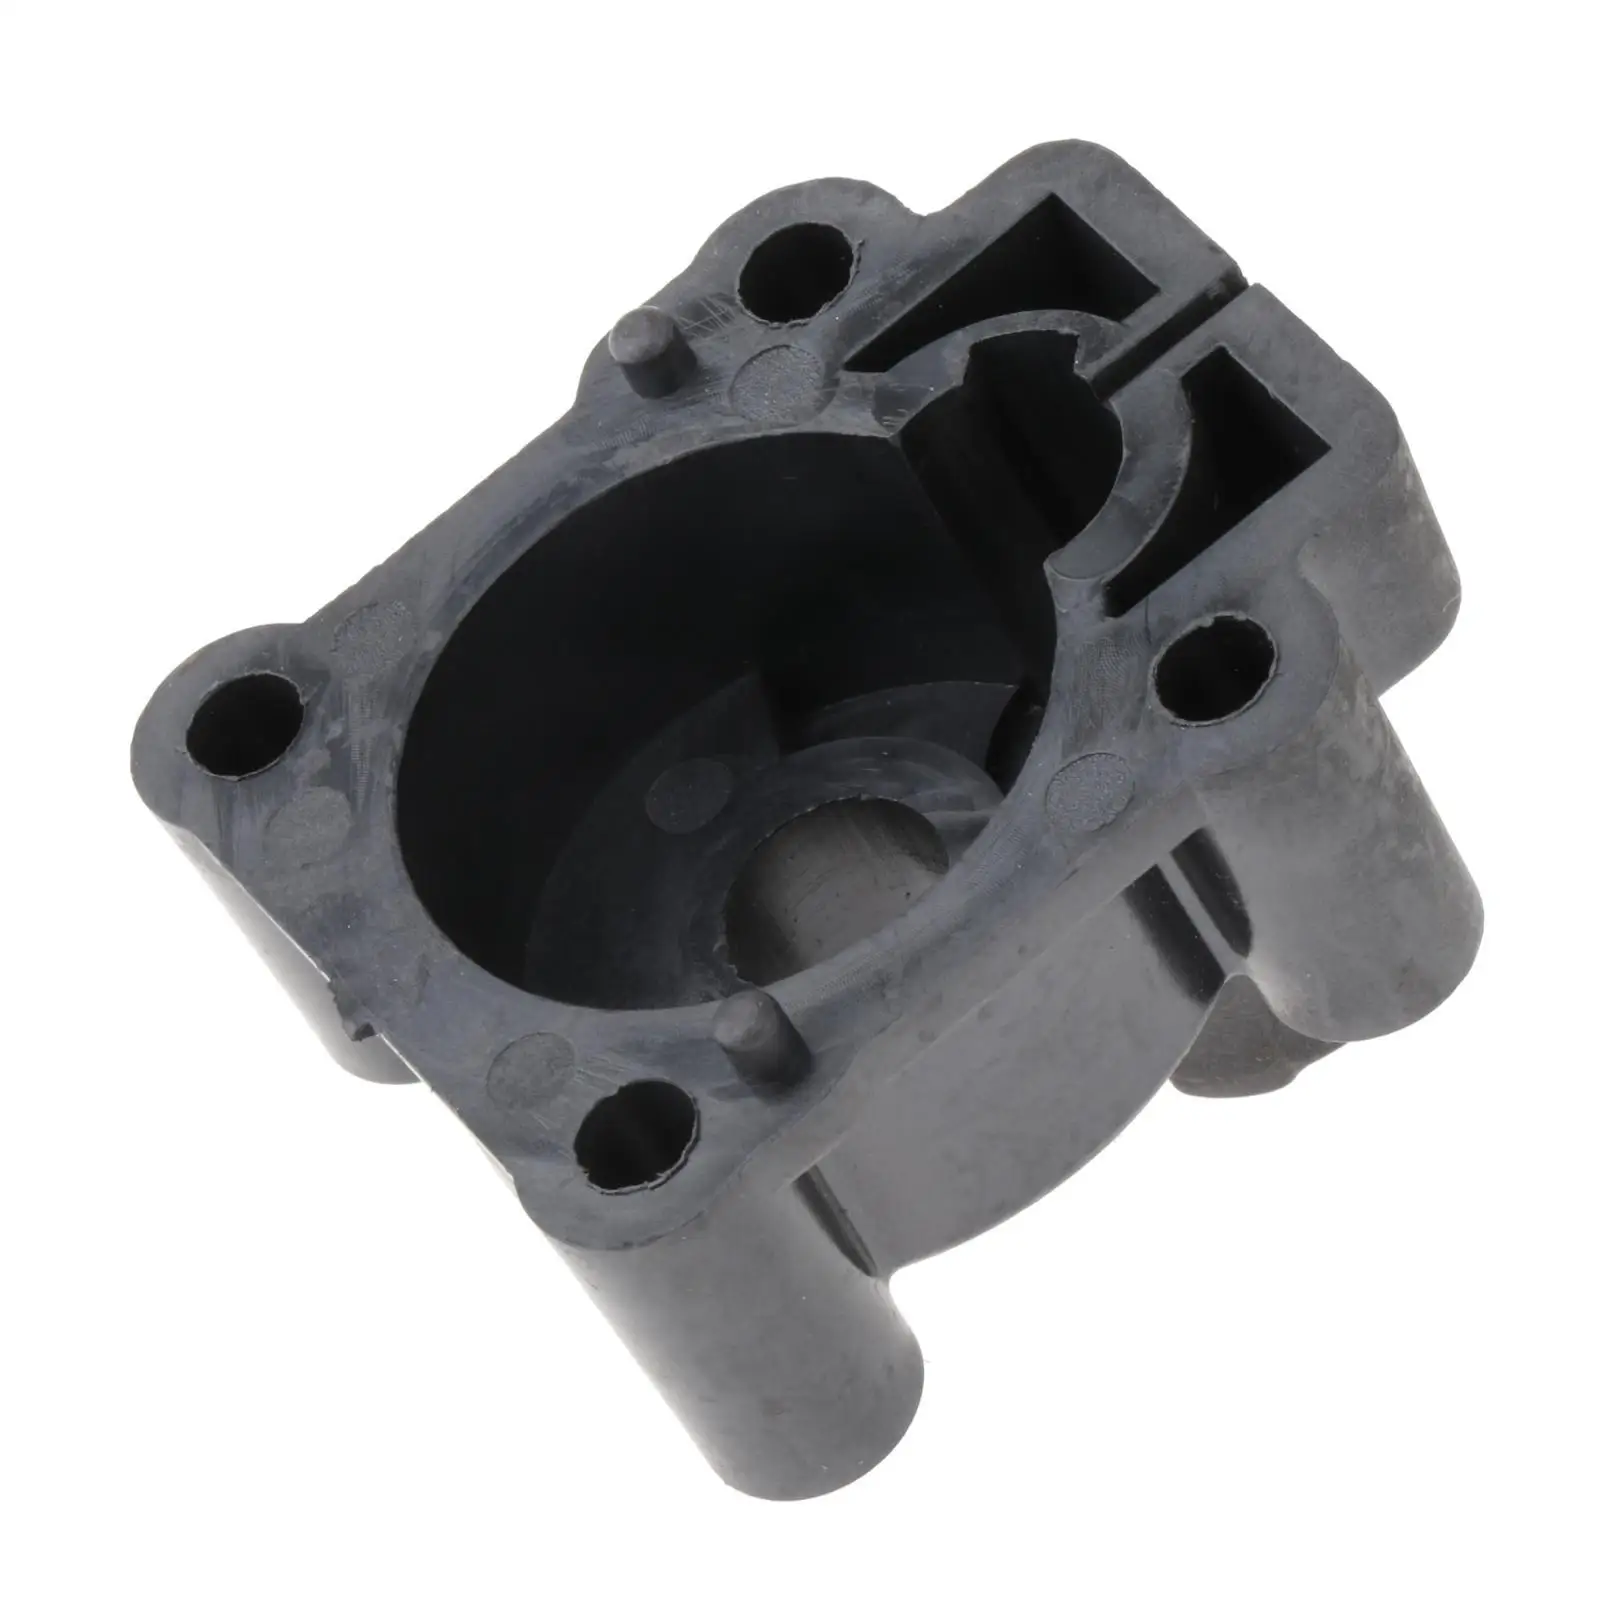 Water Pump Housing Shell 3B2-65016-0 for Nissan Outboard M 8HP 9.8HP Easily Install Vehicle Repair Parts Durable ,Black